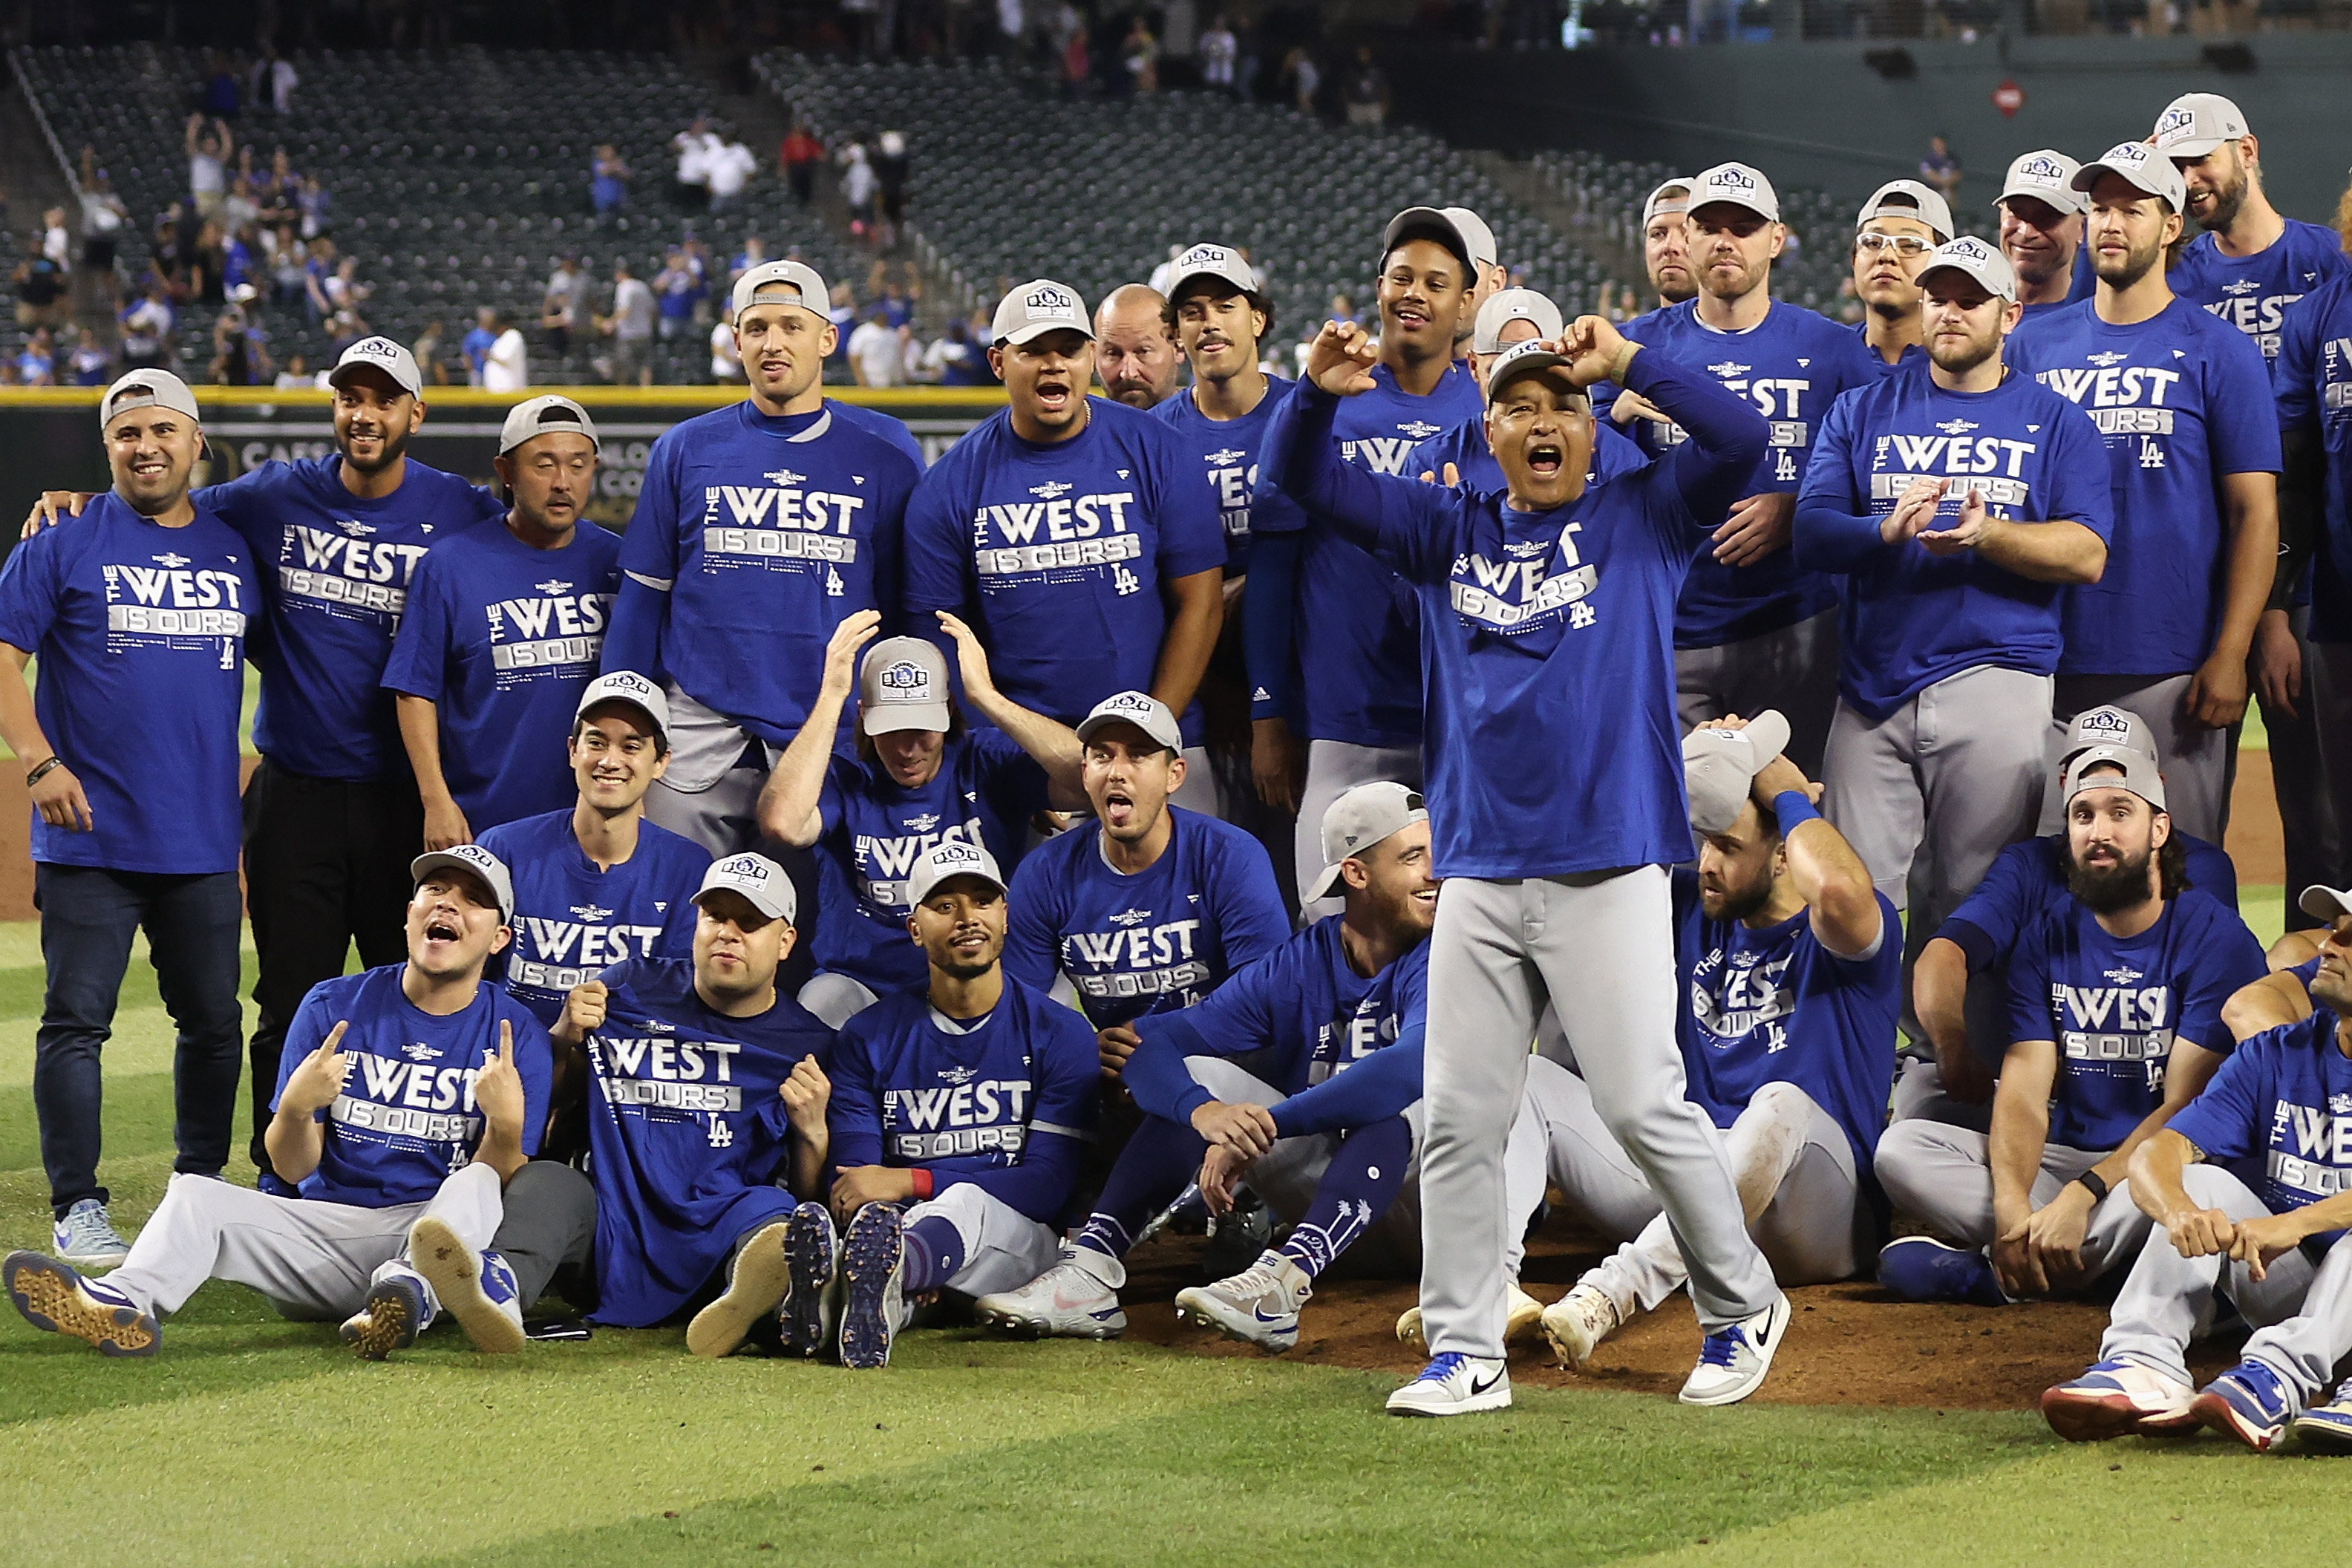 Dodgers clinch the NL West, 09/13/2022